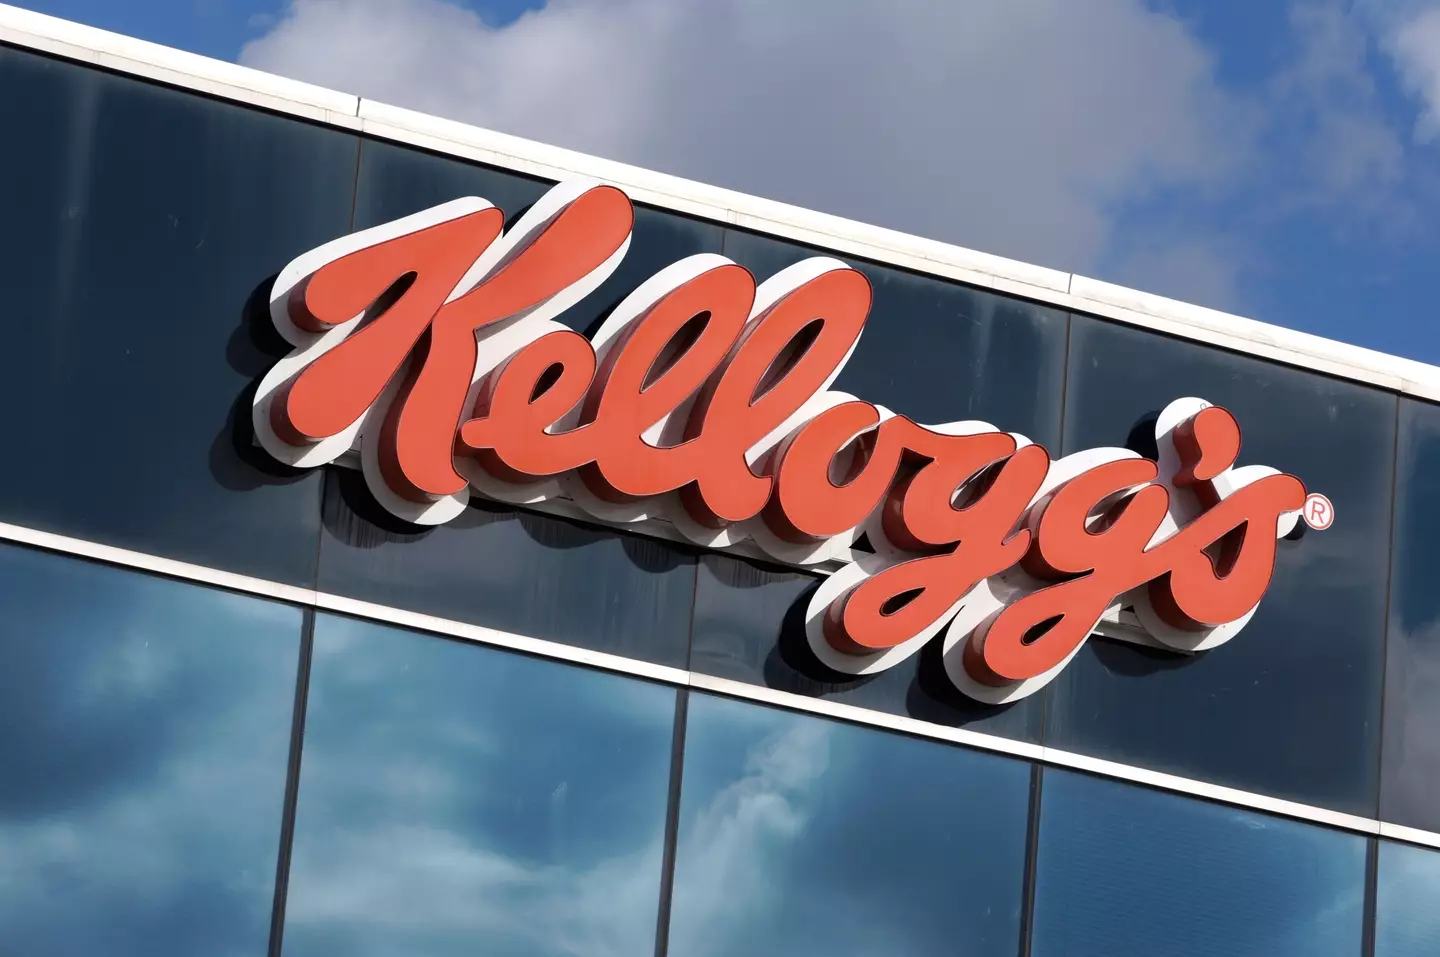 Kellogg's Ireland has introduced new measures to help support staff members (